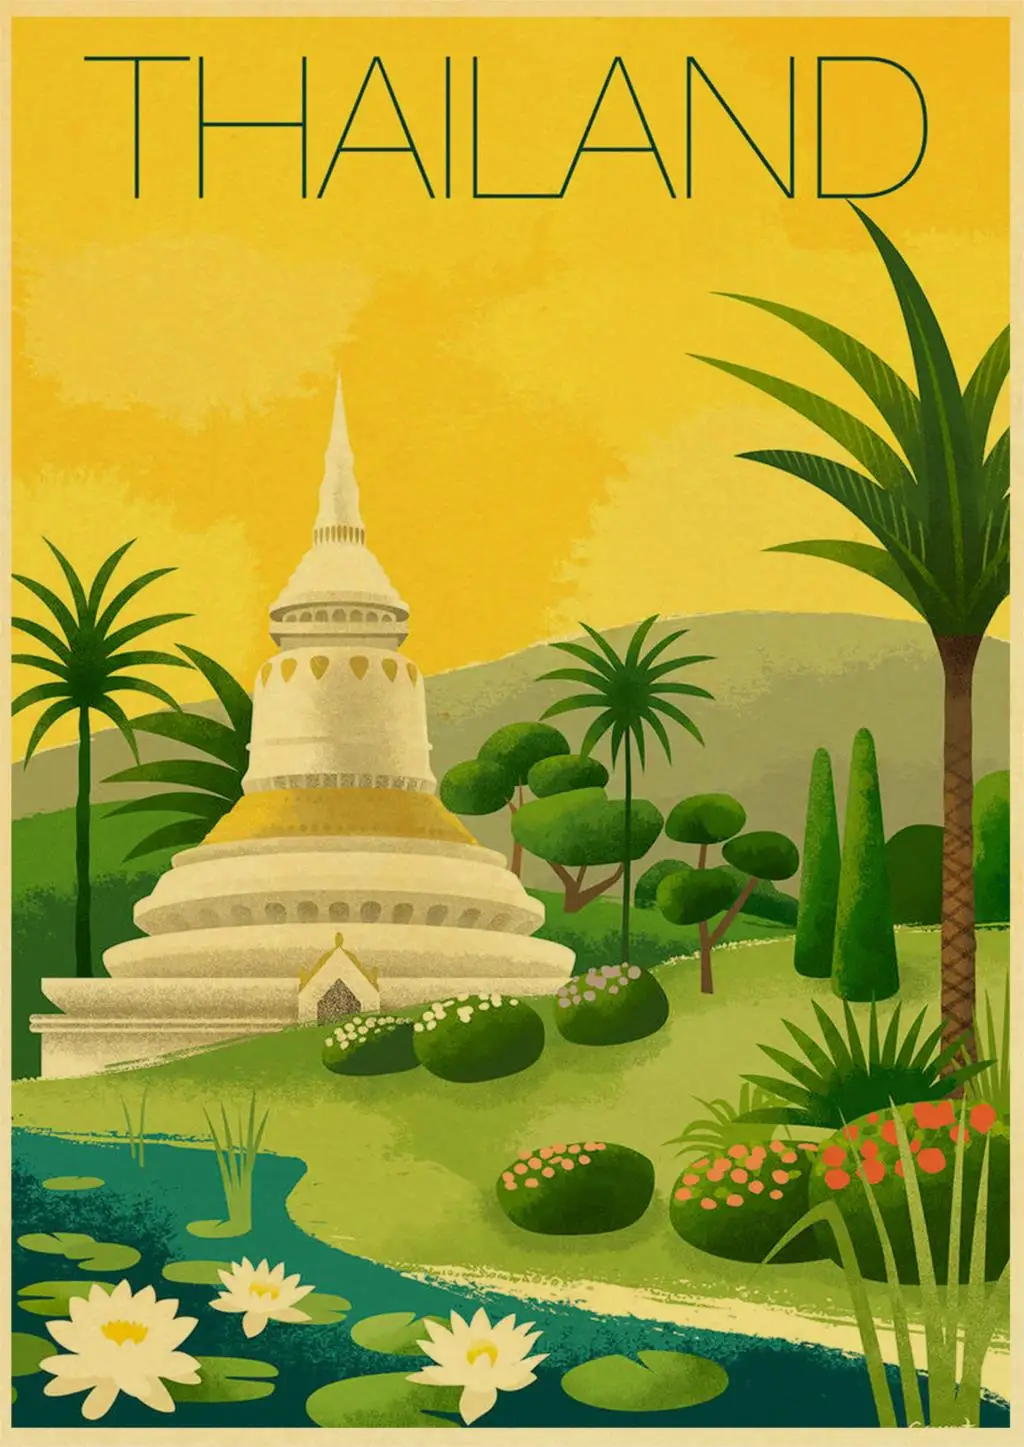 Vintage Travel City Landscape Retro Posters and Prints Wall Stickers Print on Kraft Paper Art For Home Room Decor Painting